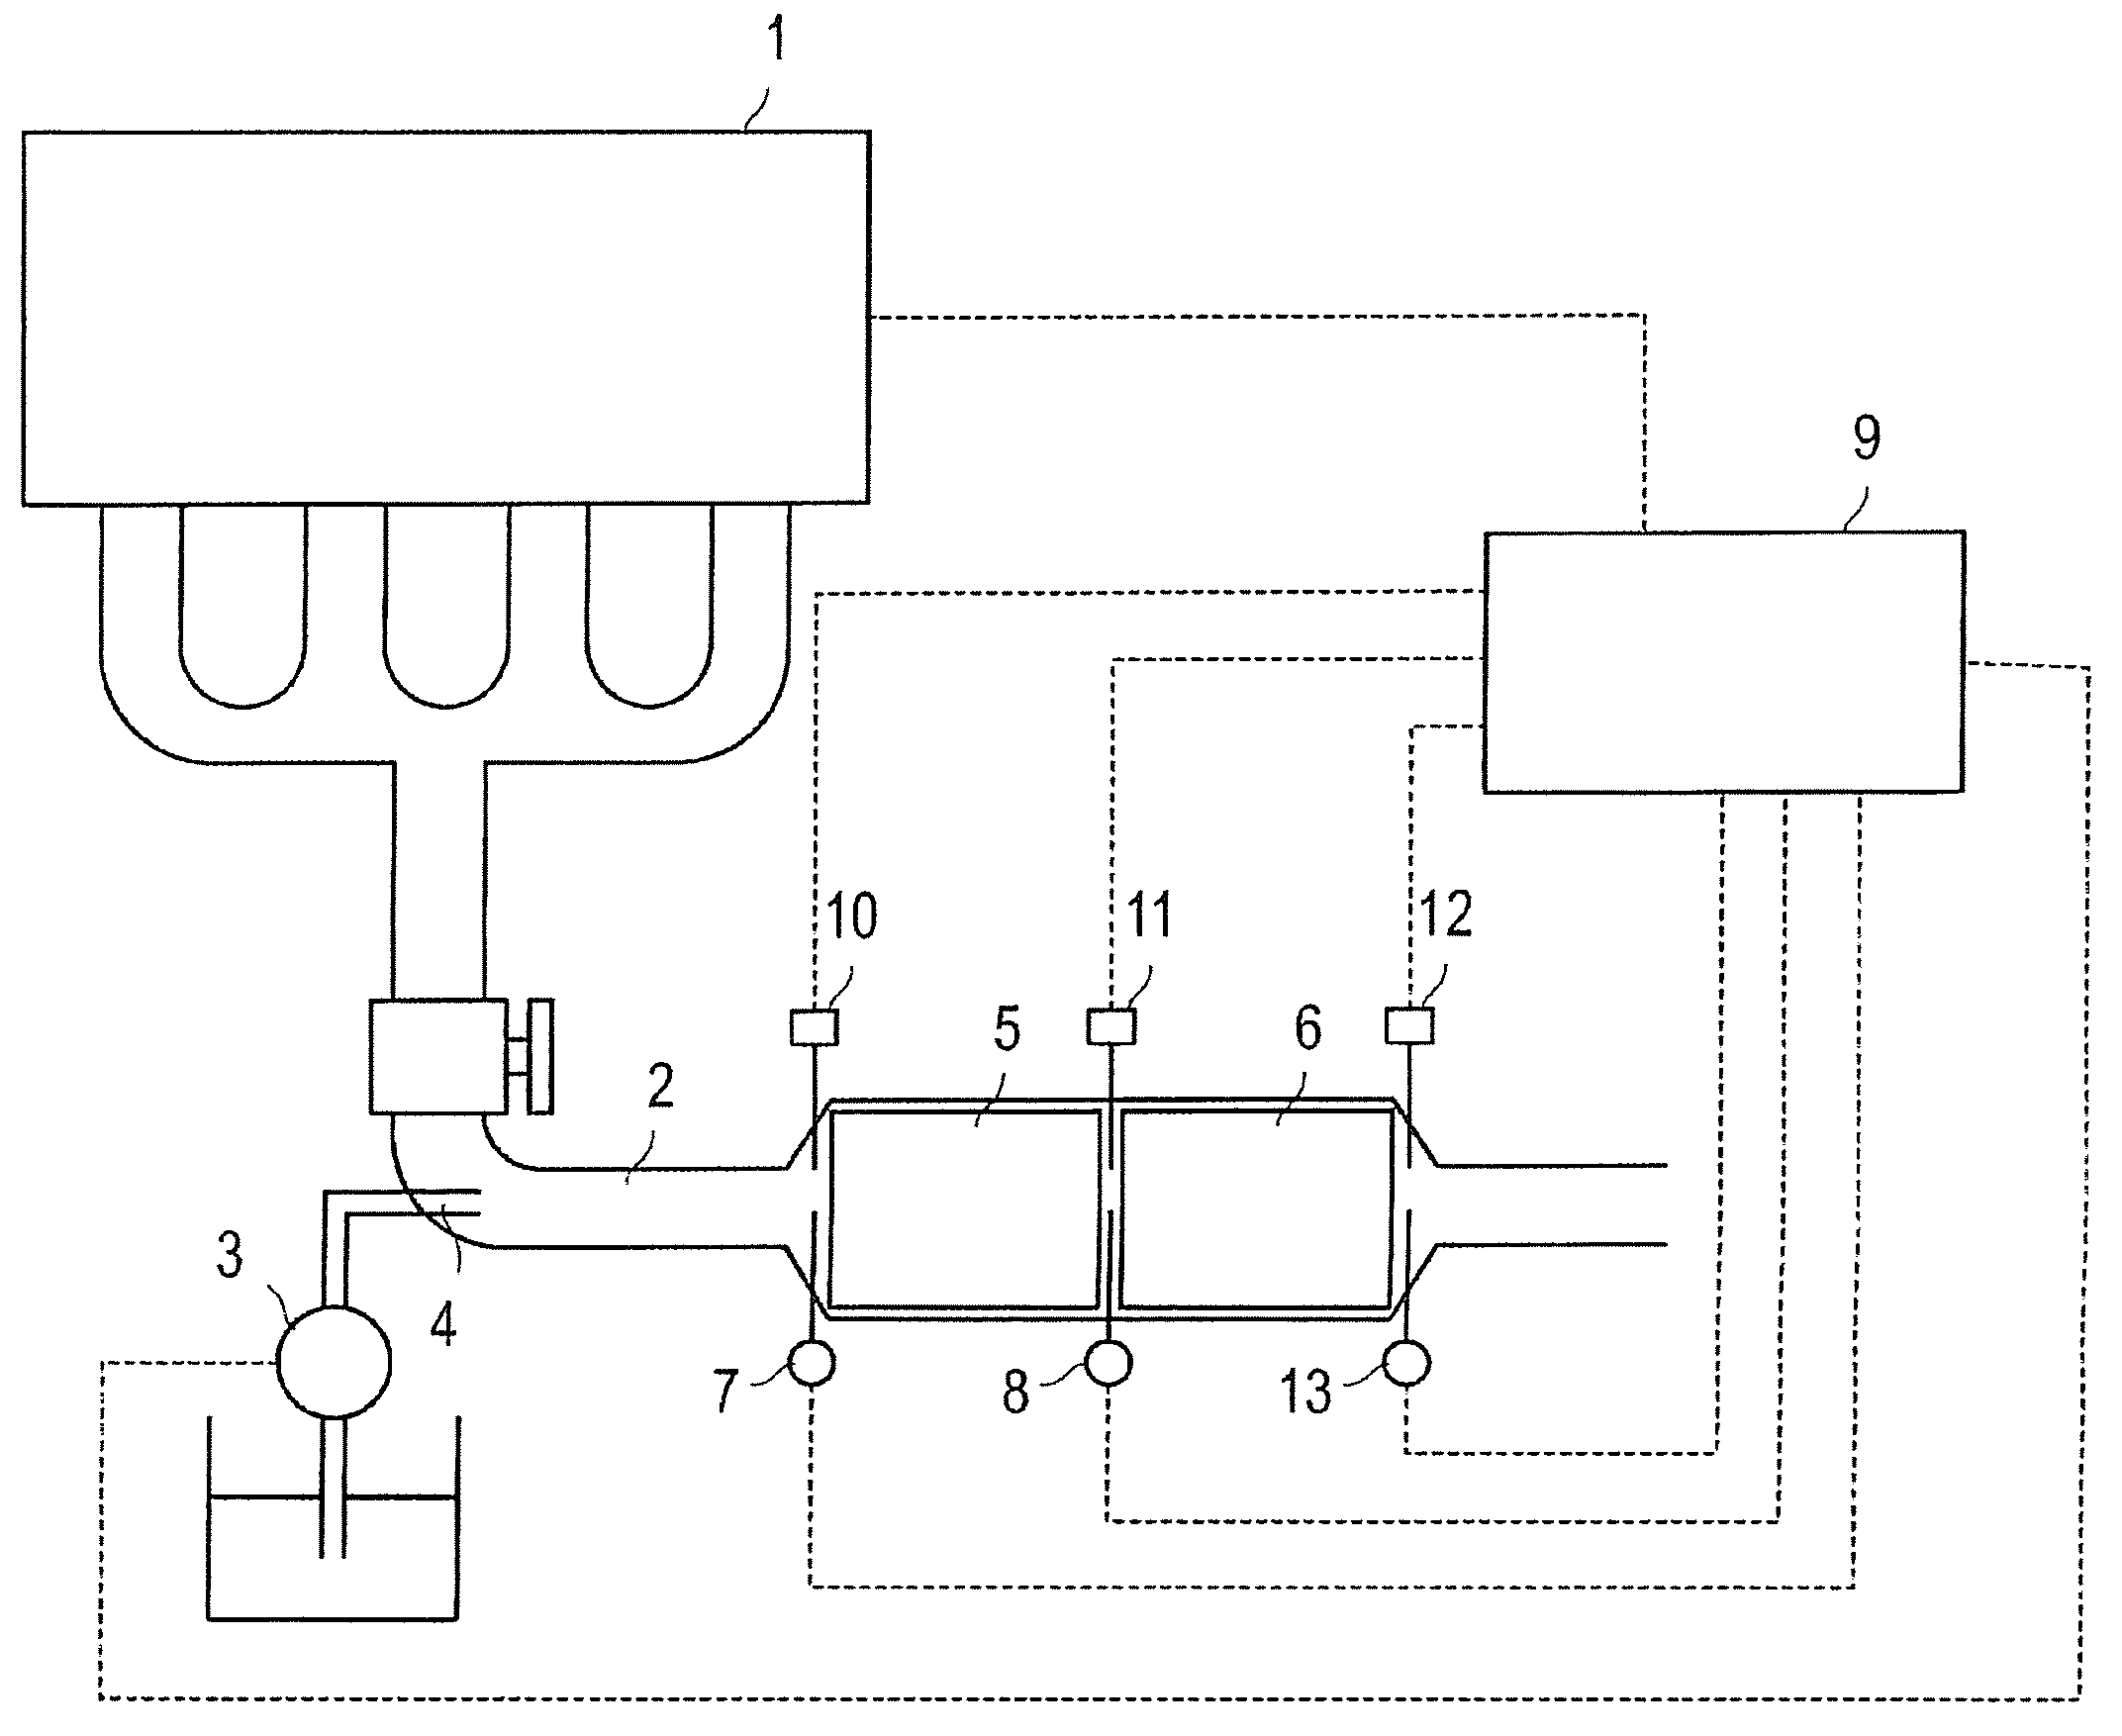 Method for purification of exhaust gas from internal combustion engine